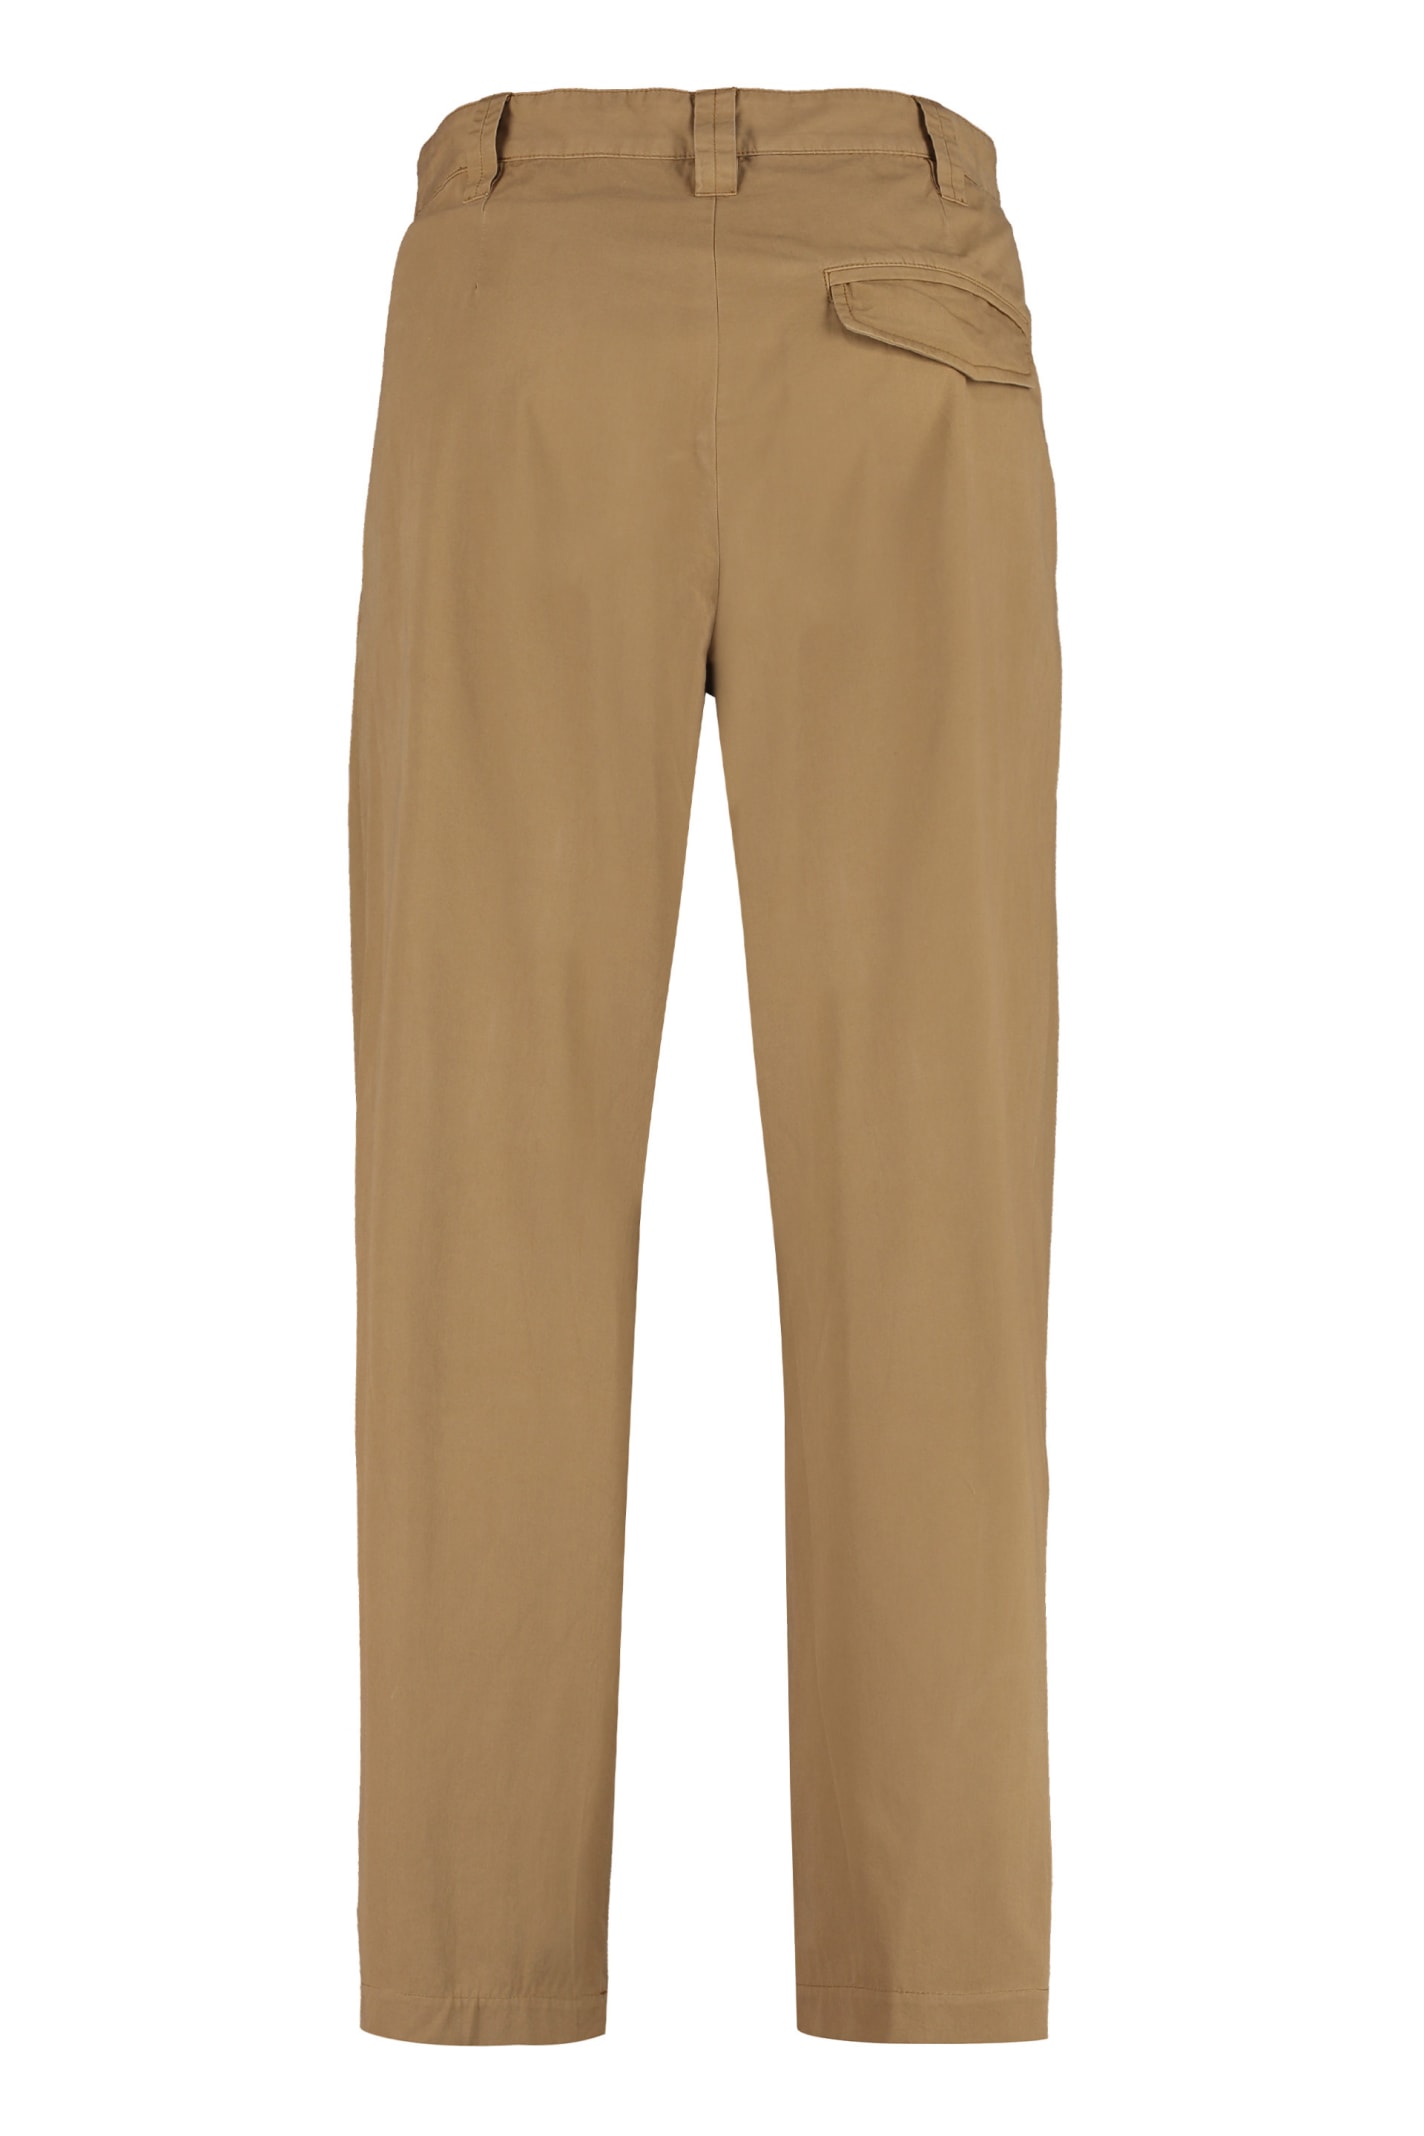 Shop Apc Cotton Chino Trousers In Cag Tabac